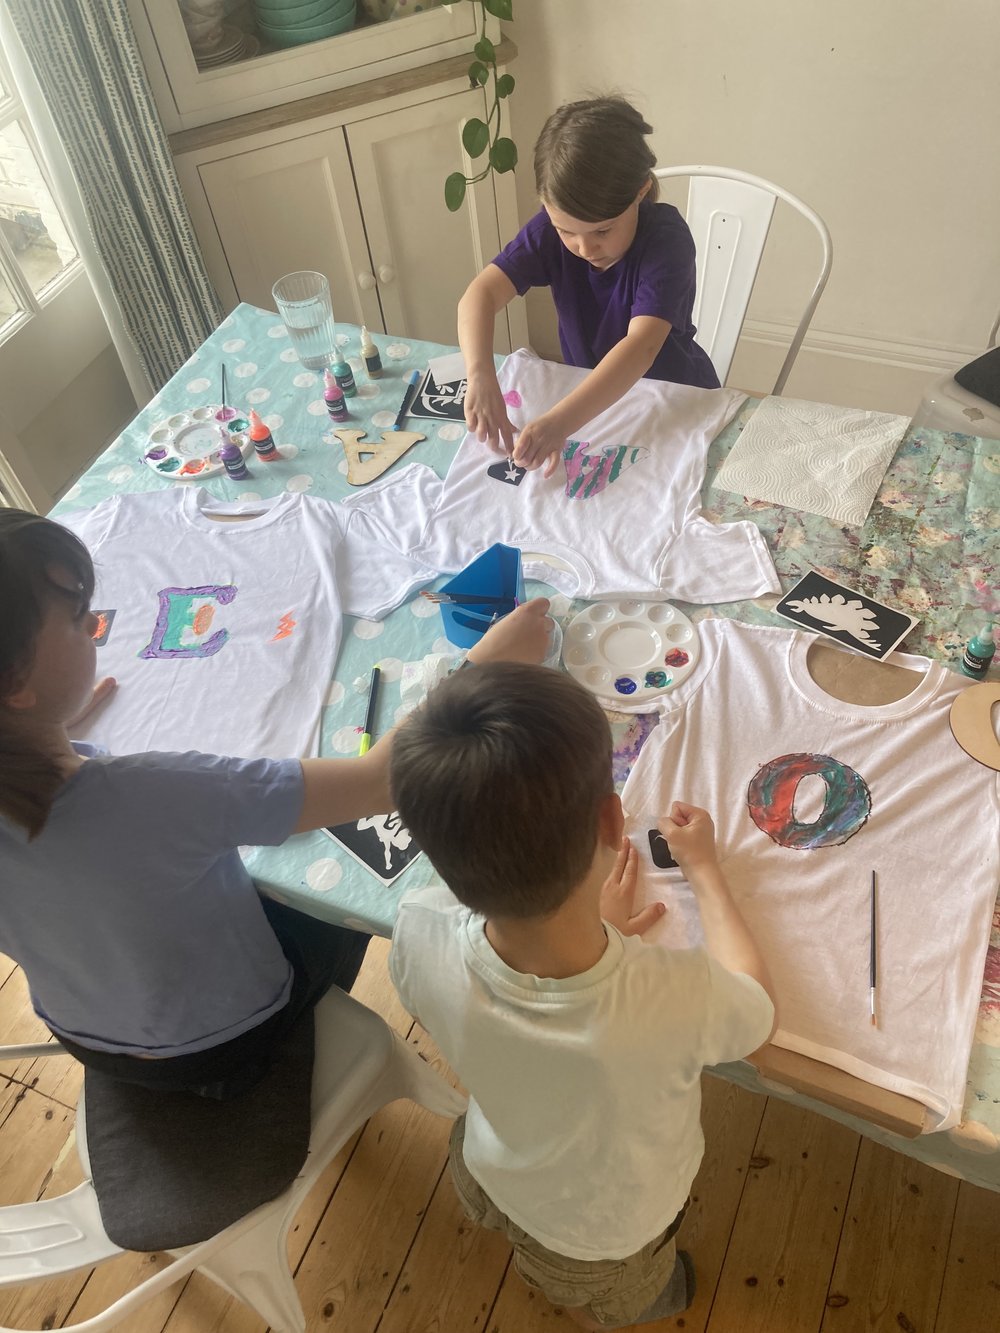 Personalised children's craft and T-shirt painting kits for creative boys  and girls. Best gifts for four year olds plus for Christmas and Birthdays.  One of a kind present for kids that have